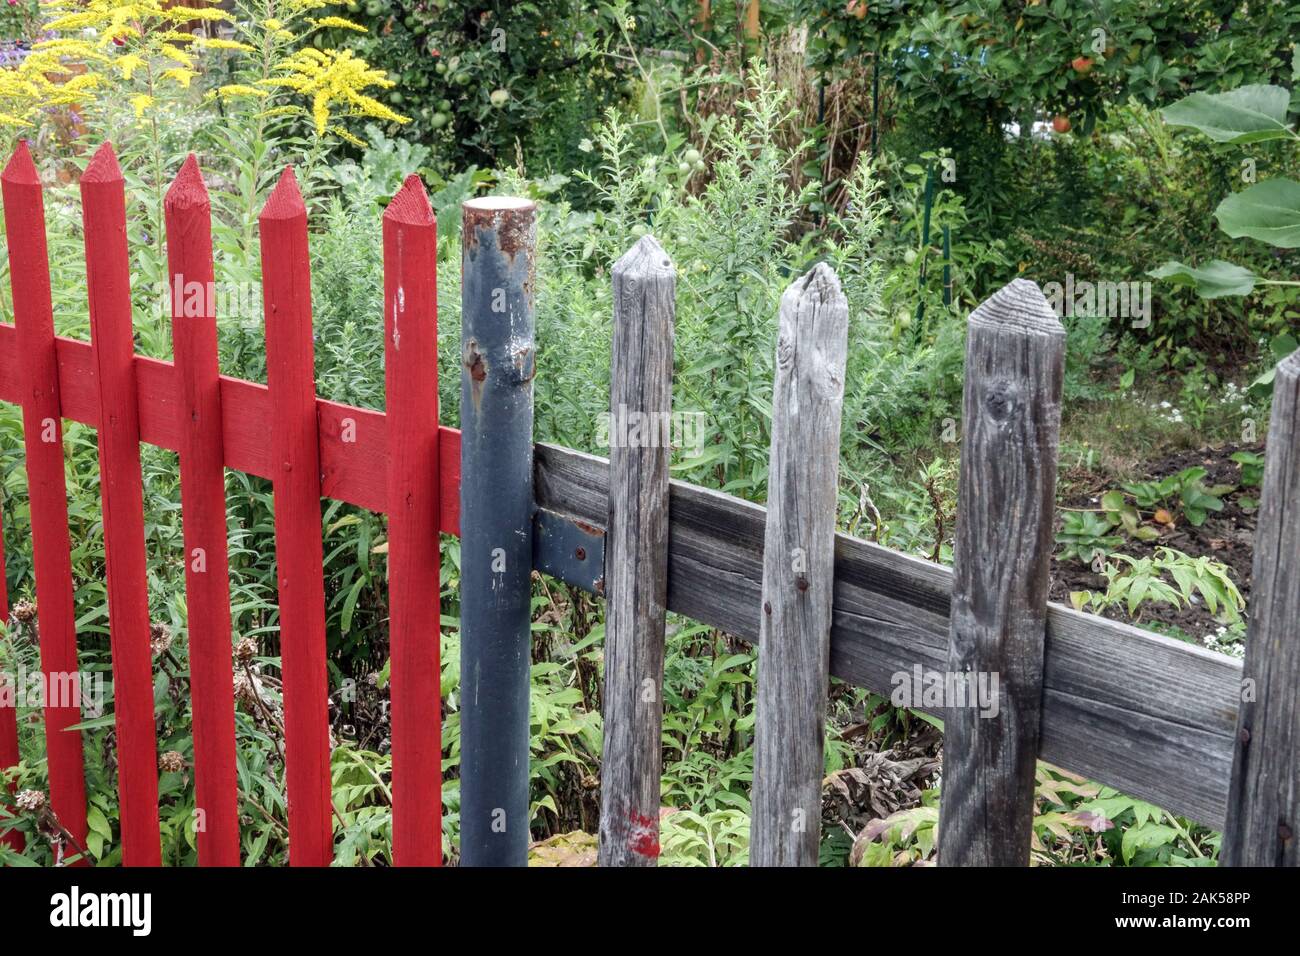 Painted and unpainted garden fence wooden fence garden Stock Photo